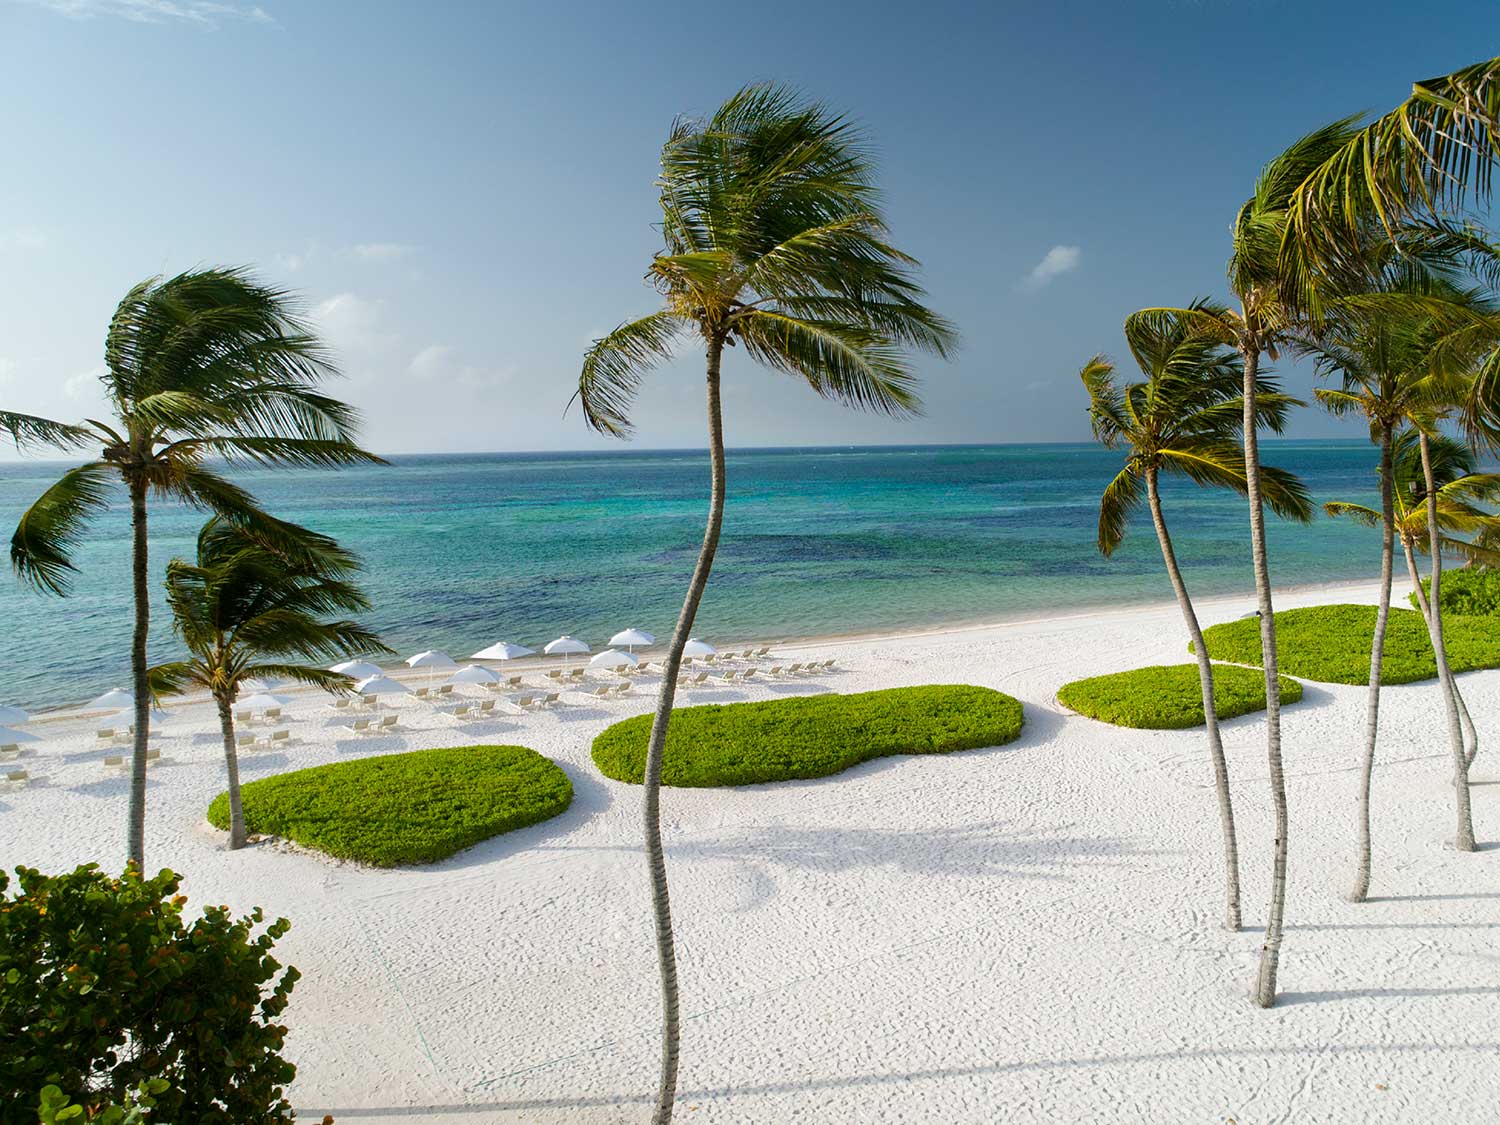 The beach adjacent to The Westin Puntacana Resort & Club in Punta Cana on the Caribbean island of the Dominican Republic.